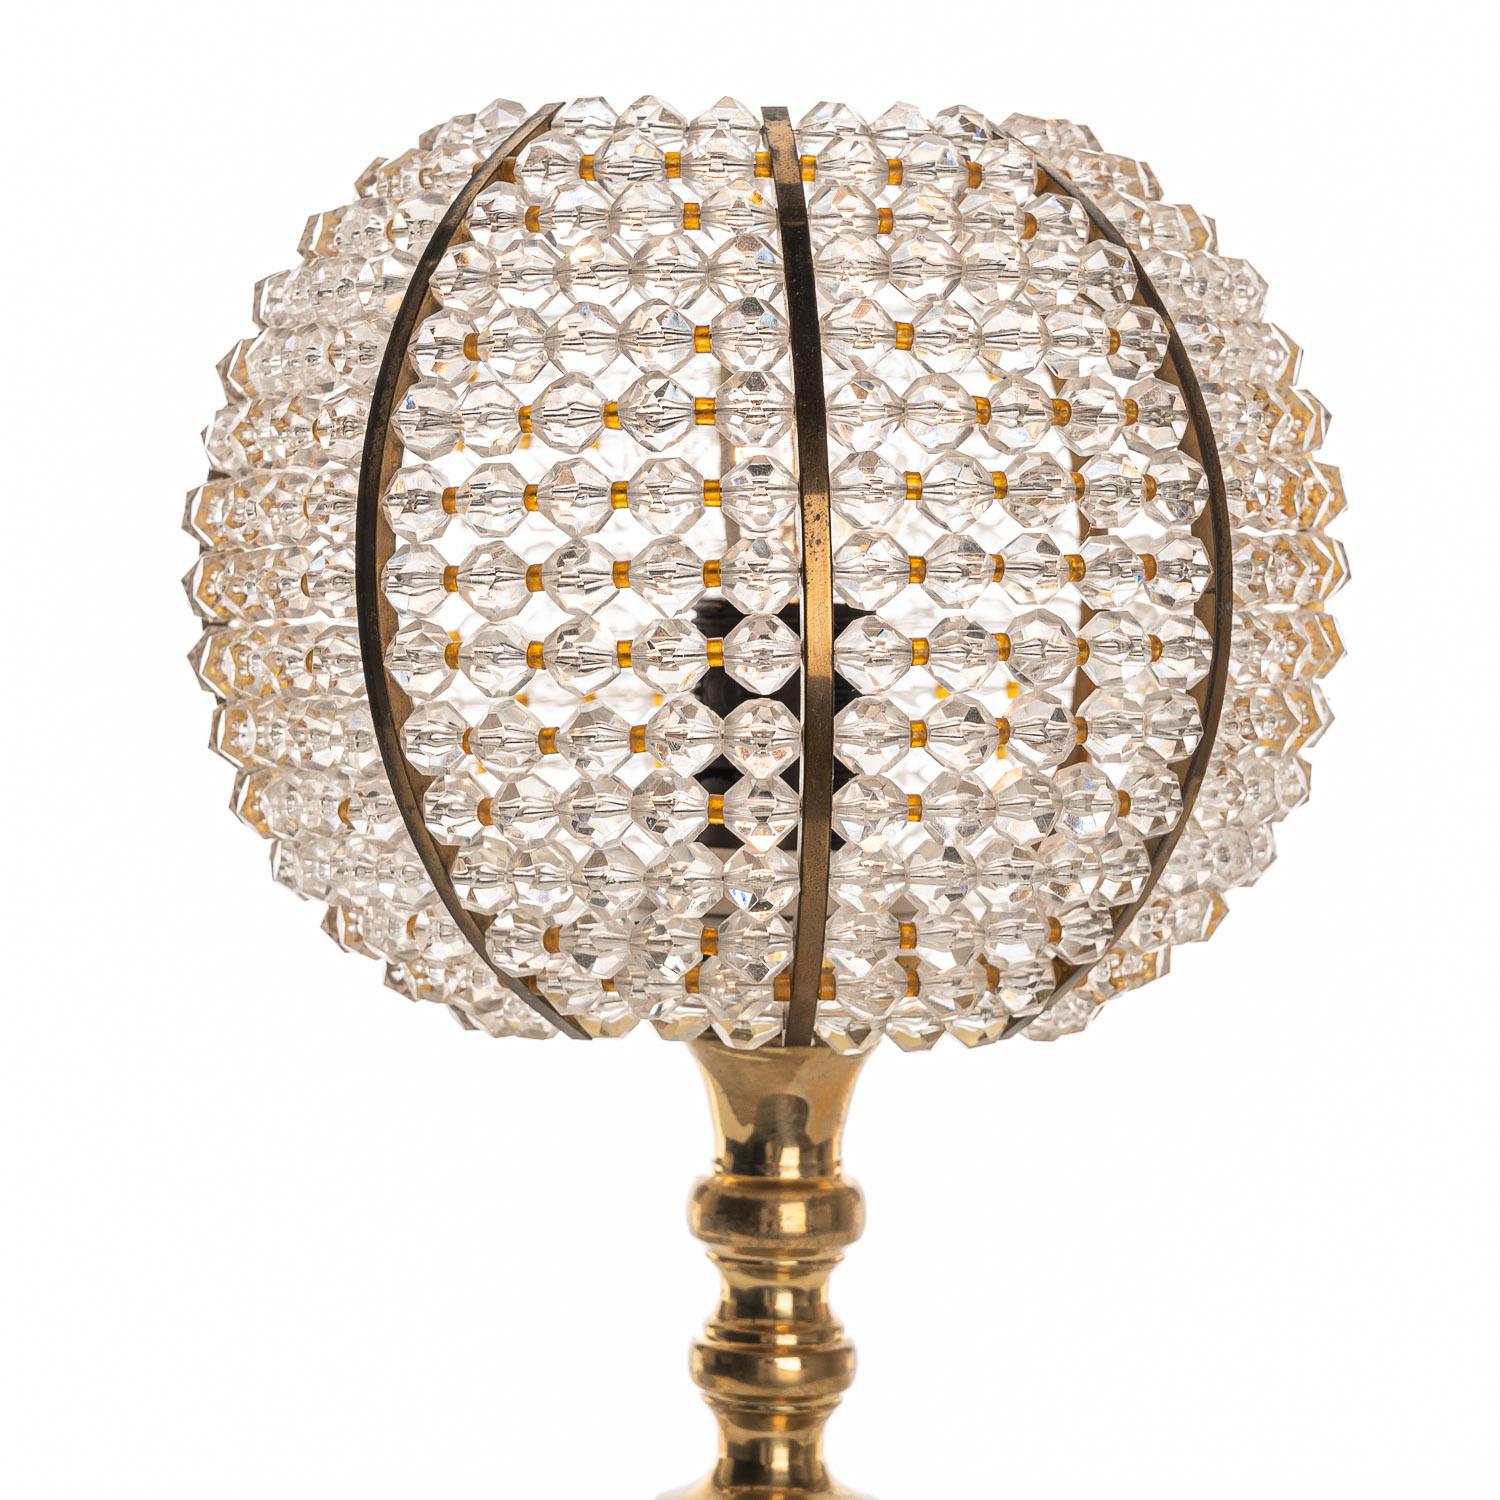 The acrylic beading and contrasting brass elements add an air of opulence to these beautiful lights. We have more lights of the same style in stock. Also in different shapes and sizes.